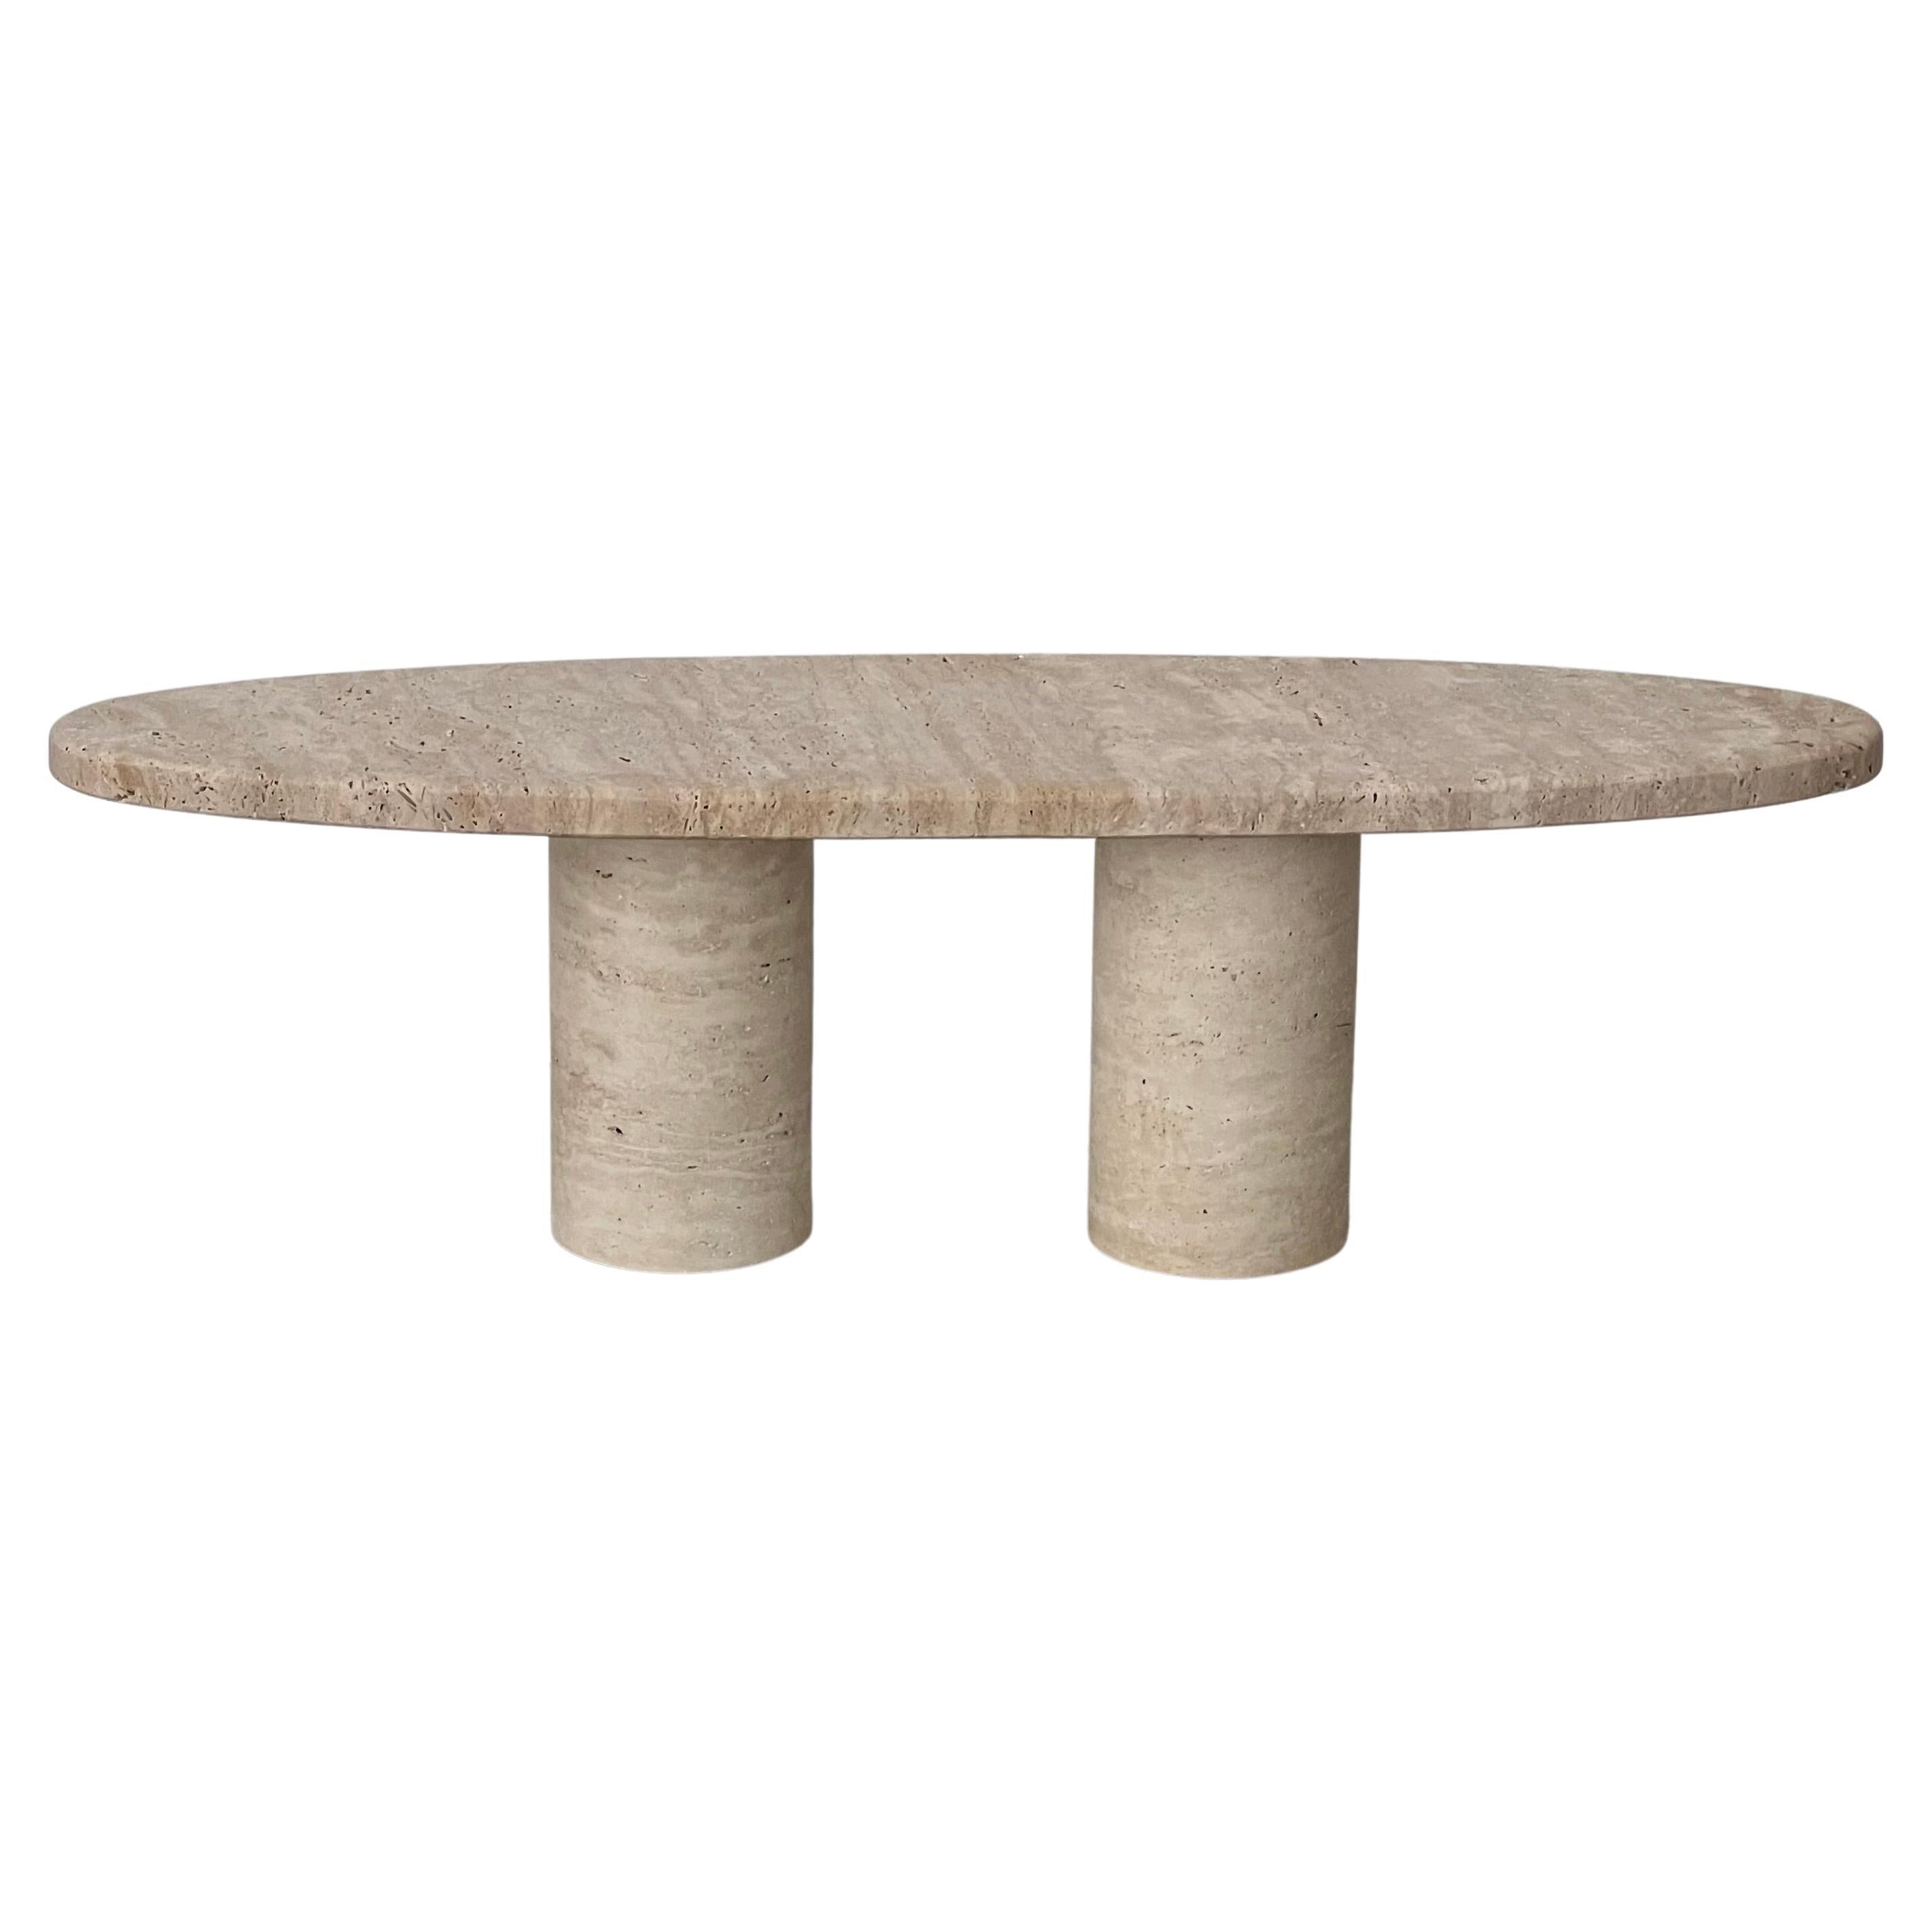 Oval travertine coffee table